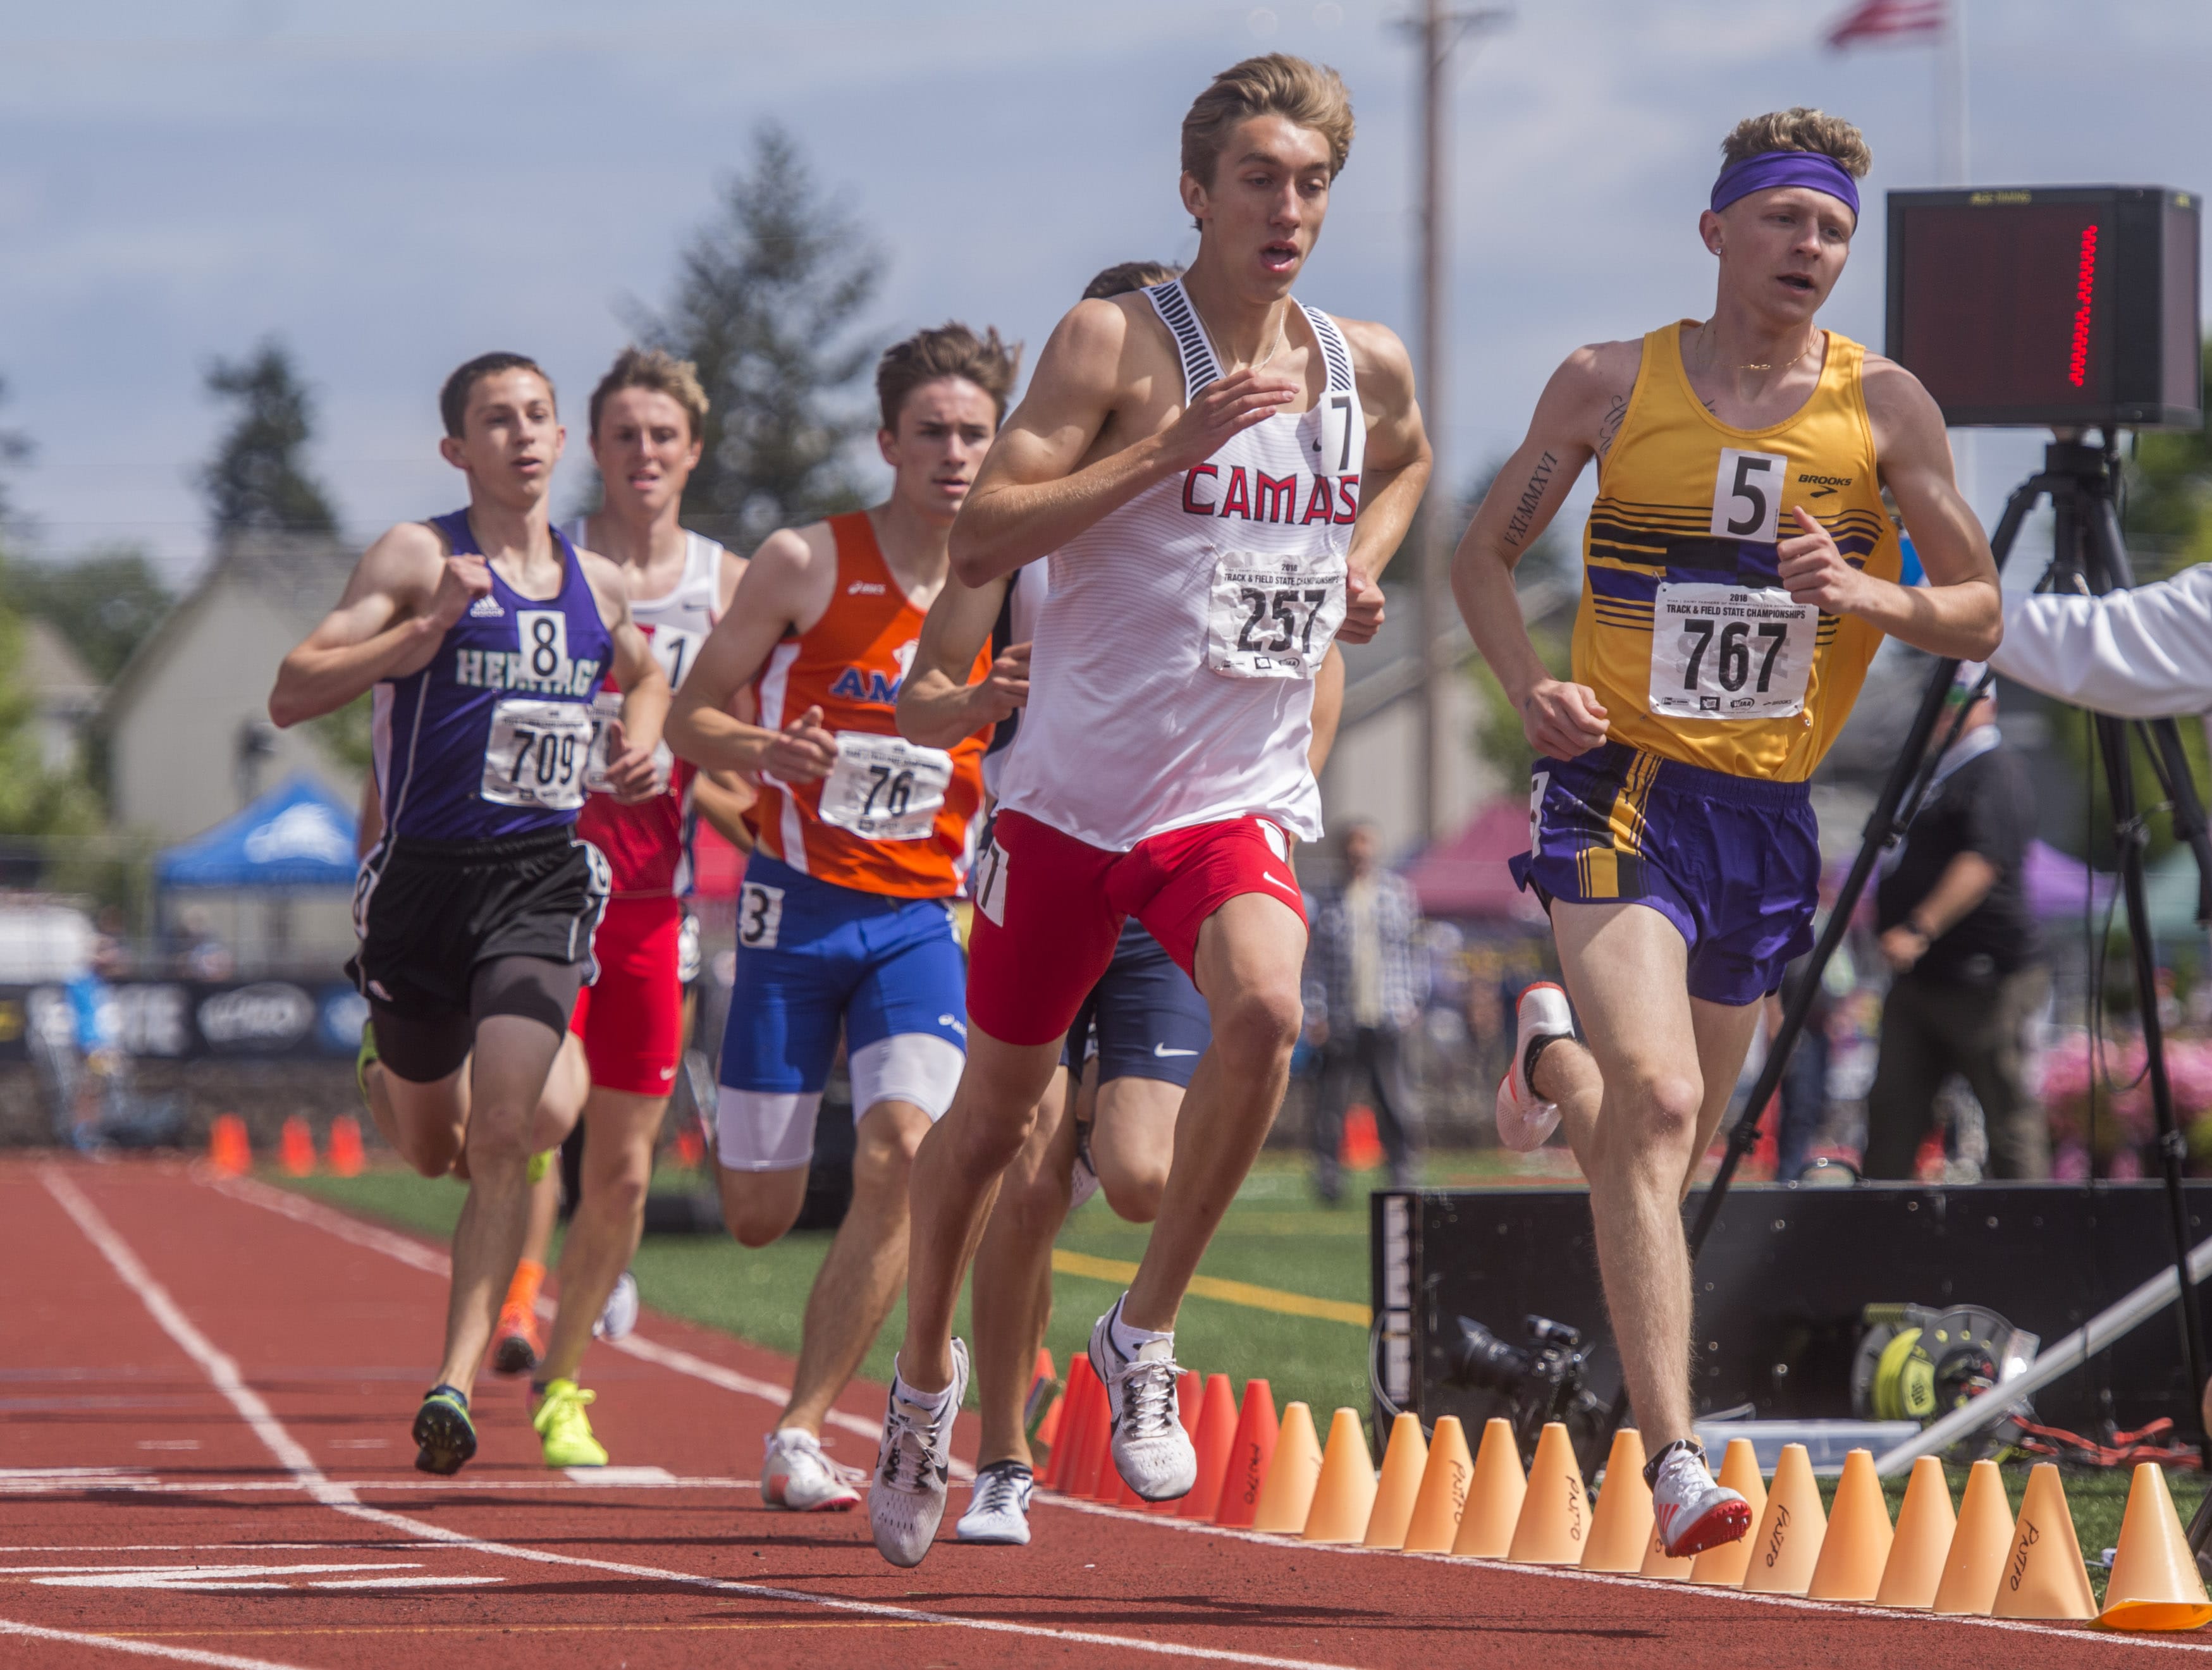 Midway through the boys 4A 800 meter run Daniel Maton of Camas (left) was side-by-side with Luke George of Issaquah, then went ahead to win with a comfortable margin at the state 2A, 3A, 4A Track &amp; Field Championships held at Mt.